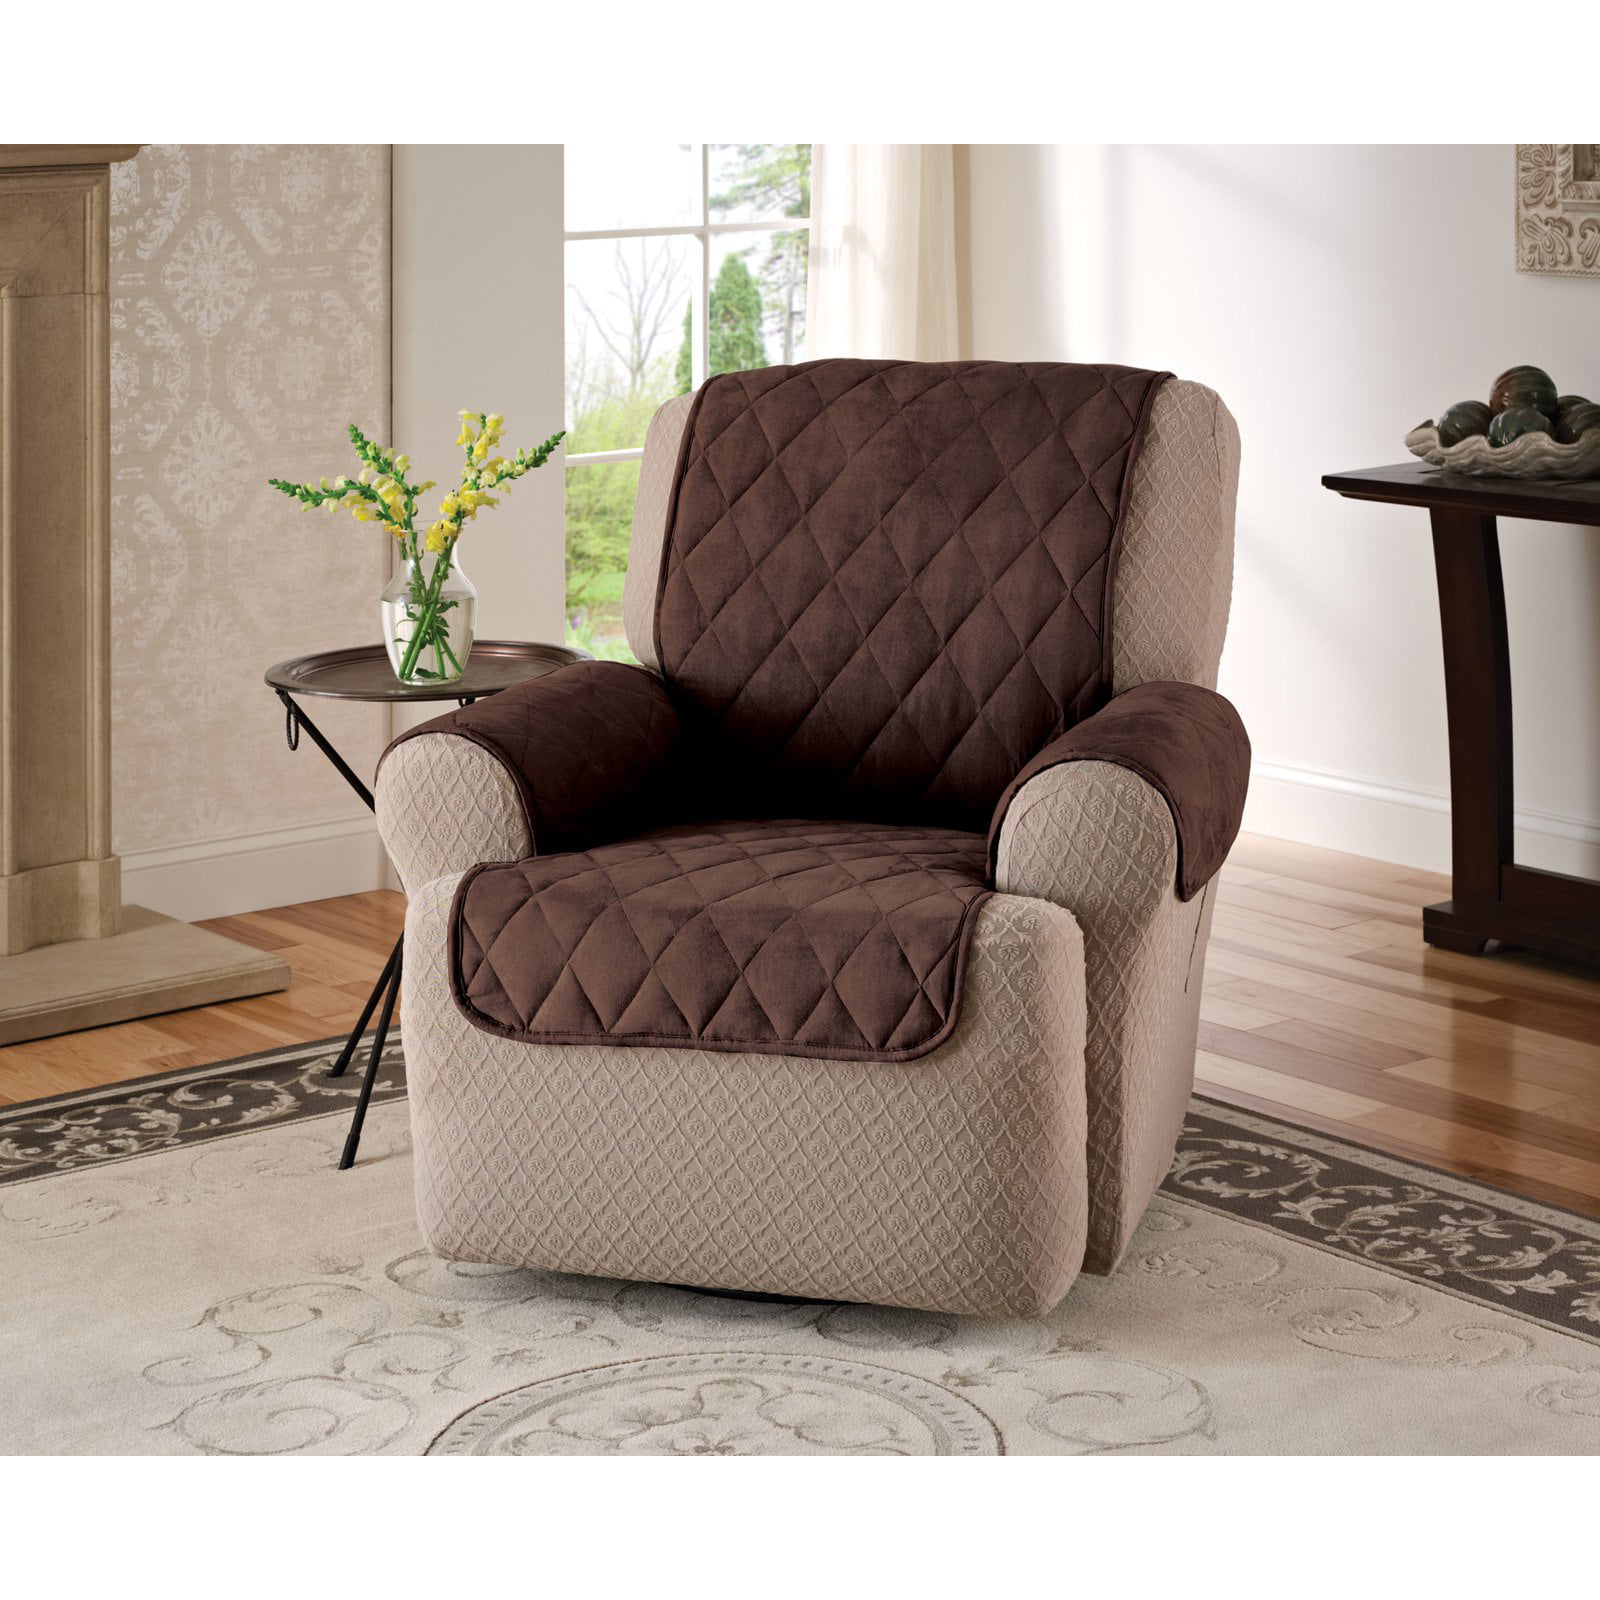 BRWN OR TAN HOME FAUX LEATHER RECLINER/WING CHAIR COVER,PROTECTOR,THROW 